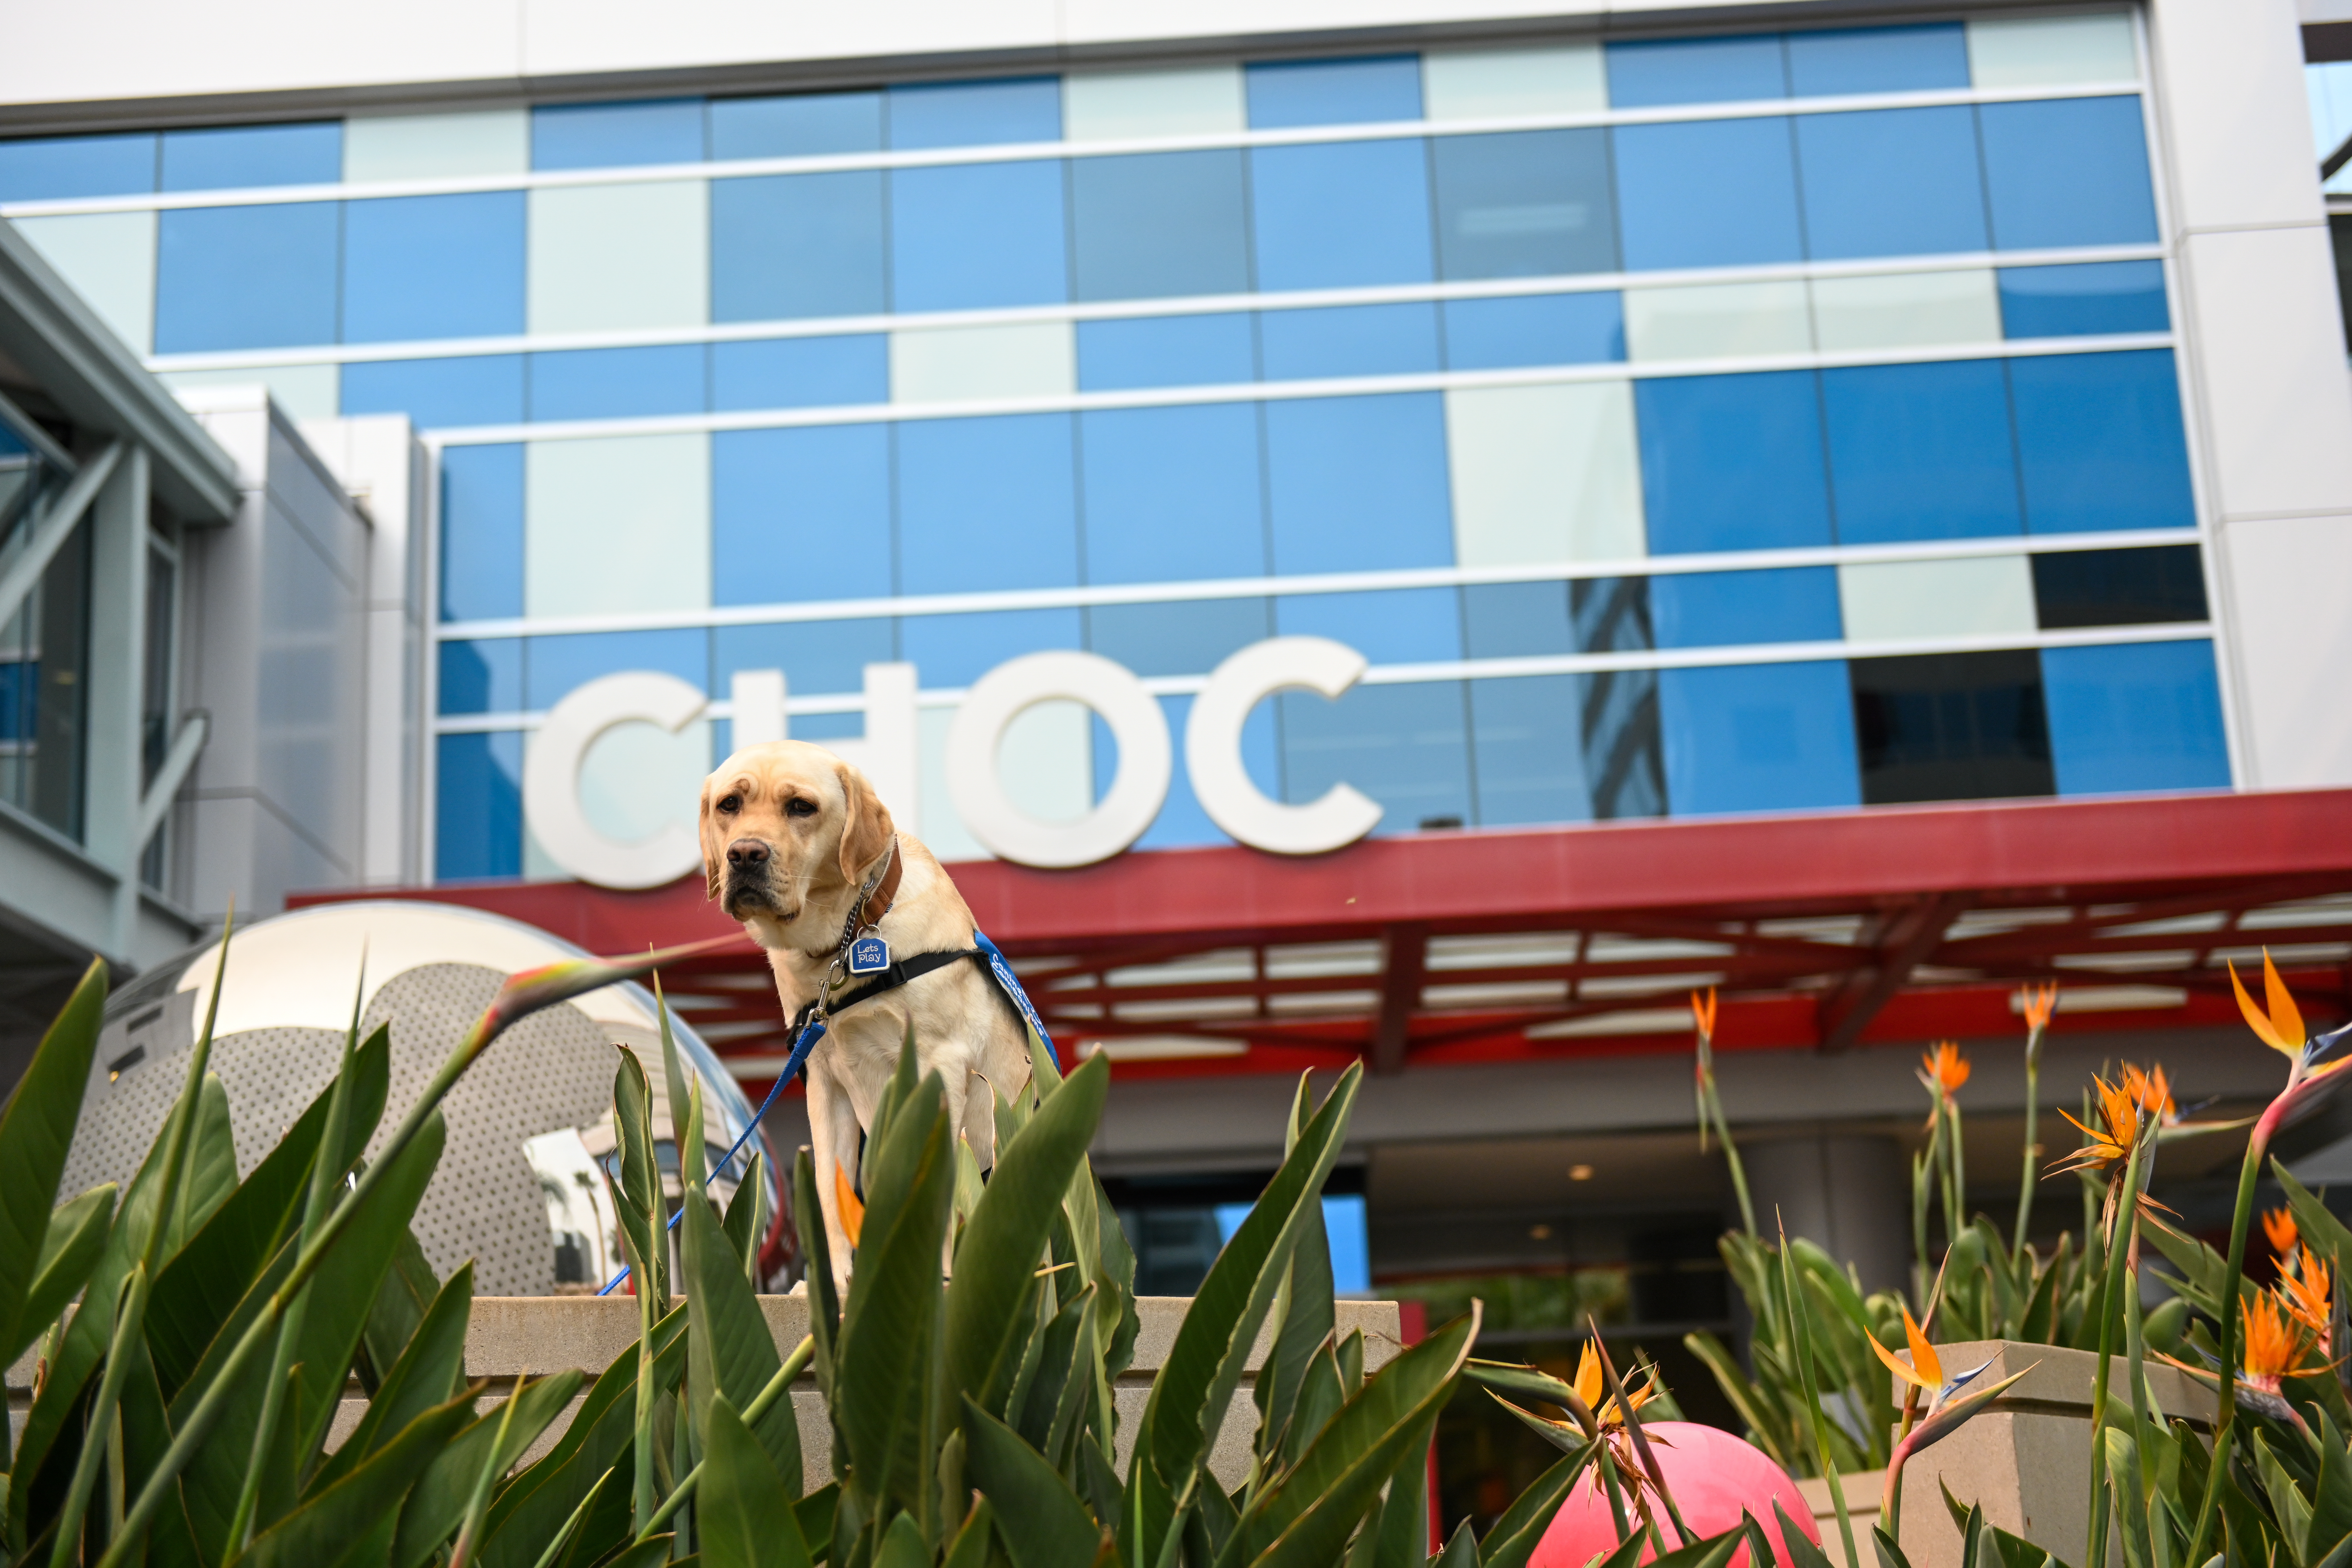 Golden Labrador dog, seated in tall grass, in front of CHOC, a children's hospital